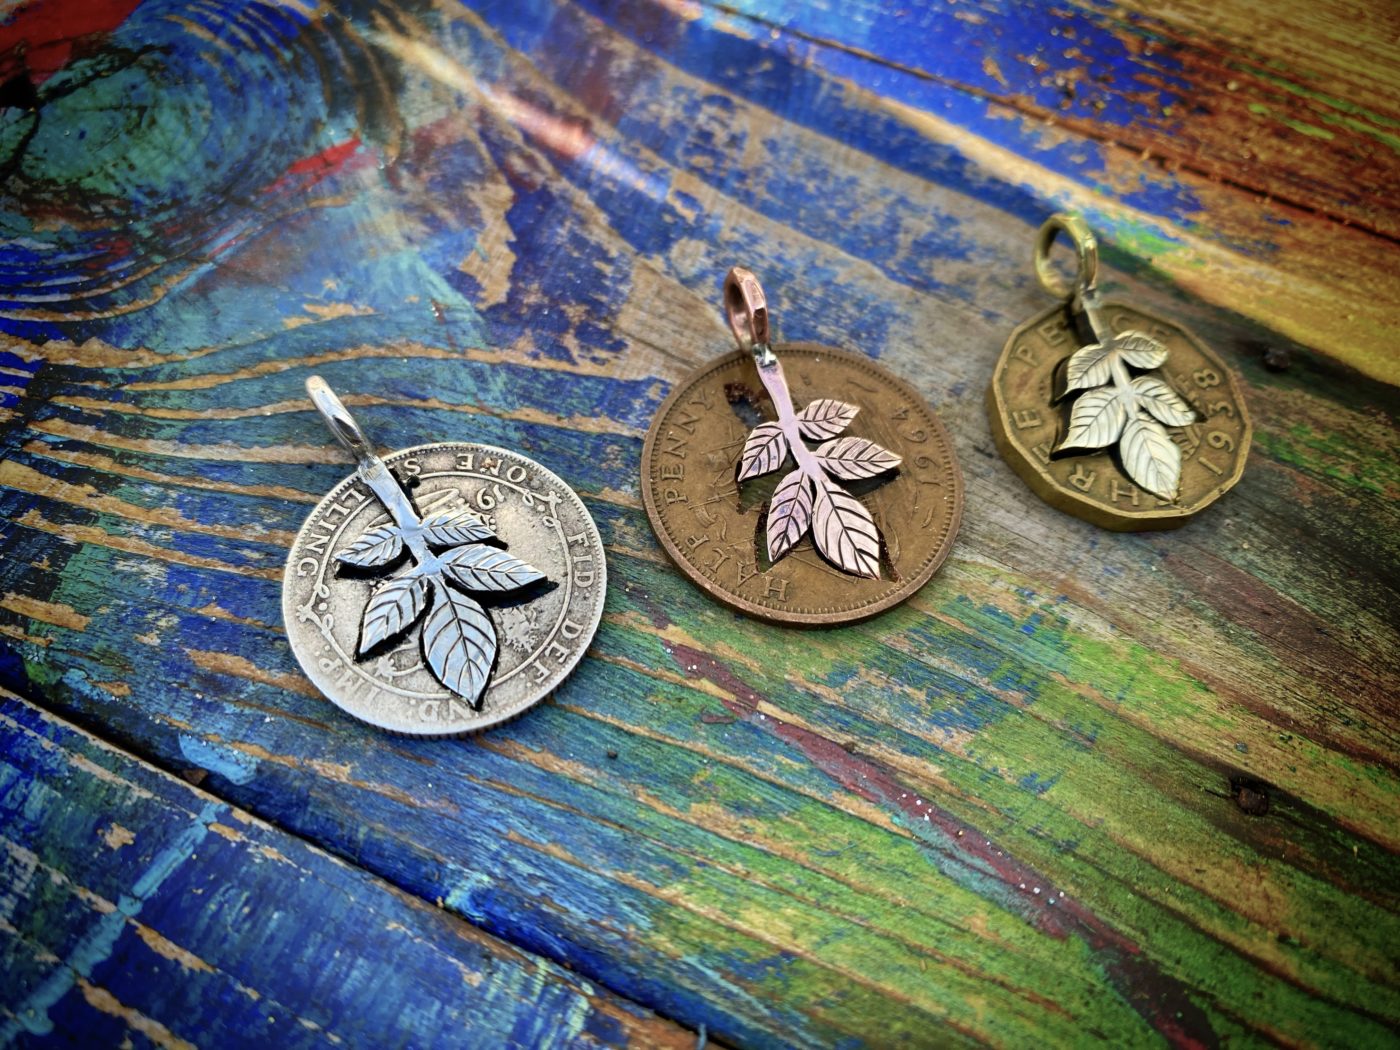 Elder leaf jewellery made from recycled, repurposed, upcycled coins and silver